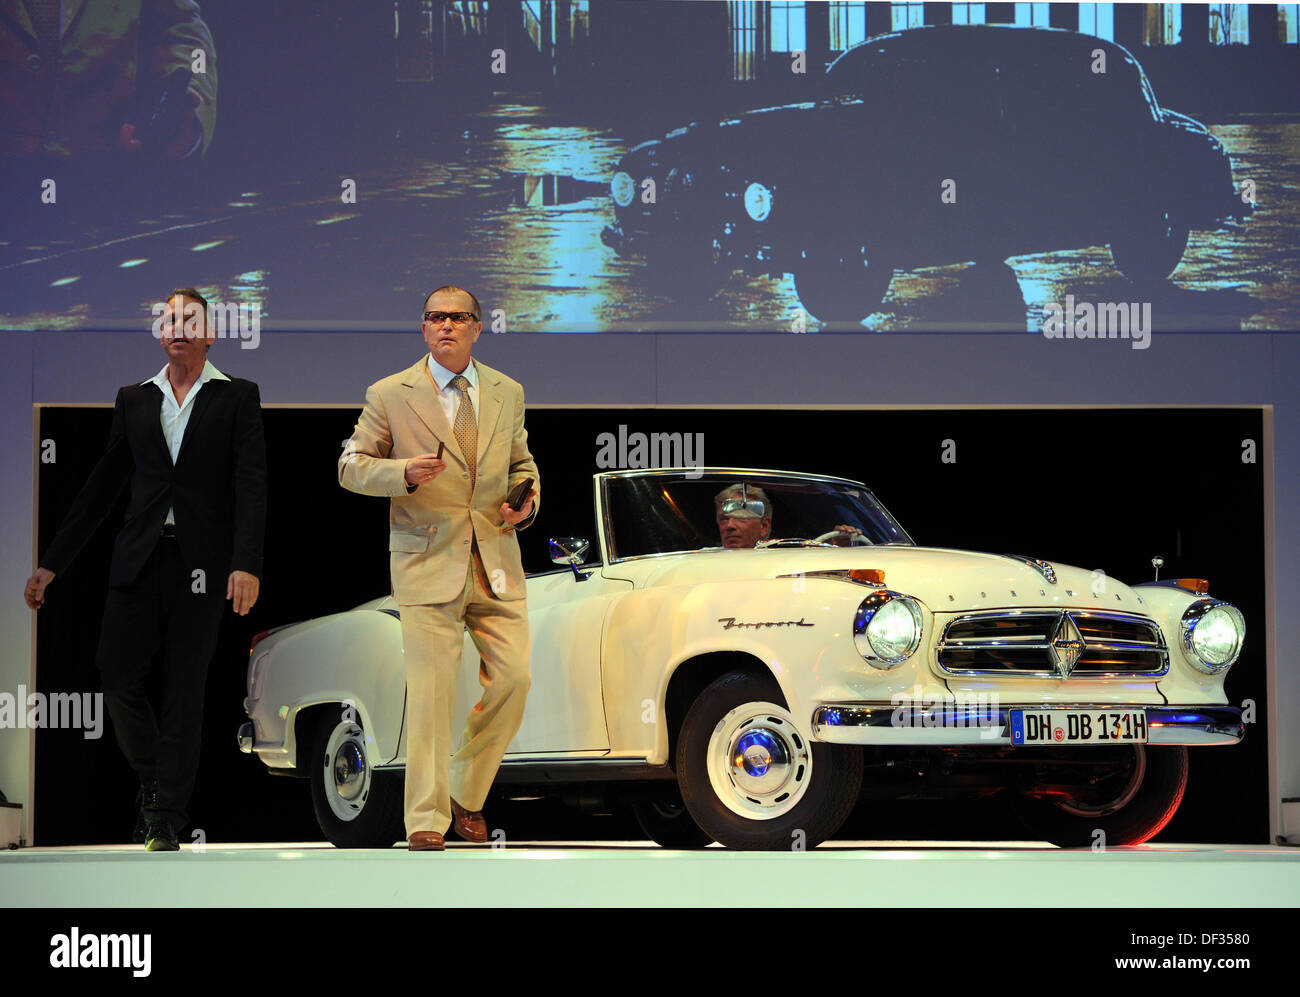 Bremen, Germany. 26th Sep, 2013. An actor (R) of 'tehatre du pain' plays the role of car manufacturer Carl C.W. Borgward in front of a Borgward Isabella Cabrio of the 1950s at the anniversary '35 years of Mercedes-Benz car production and 75 years of production hall Bremen' at the pressing plant of Daimler in Bremen, Germany, 26 September 2013. The automobile plant was founded 75 years ago by Carl F.W. Borgward and 35 ago Mercedes-Benz started producing at the site. Photo: Ingo Wagner/dpa/Alamy Live News Stock Photo